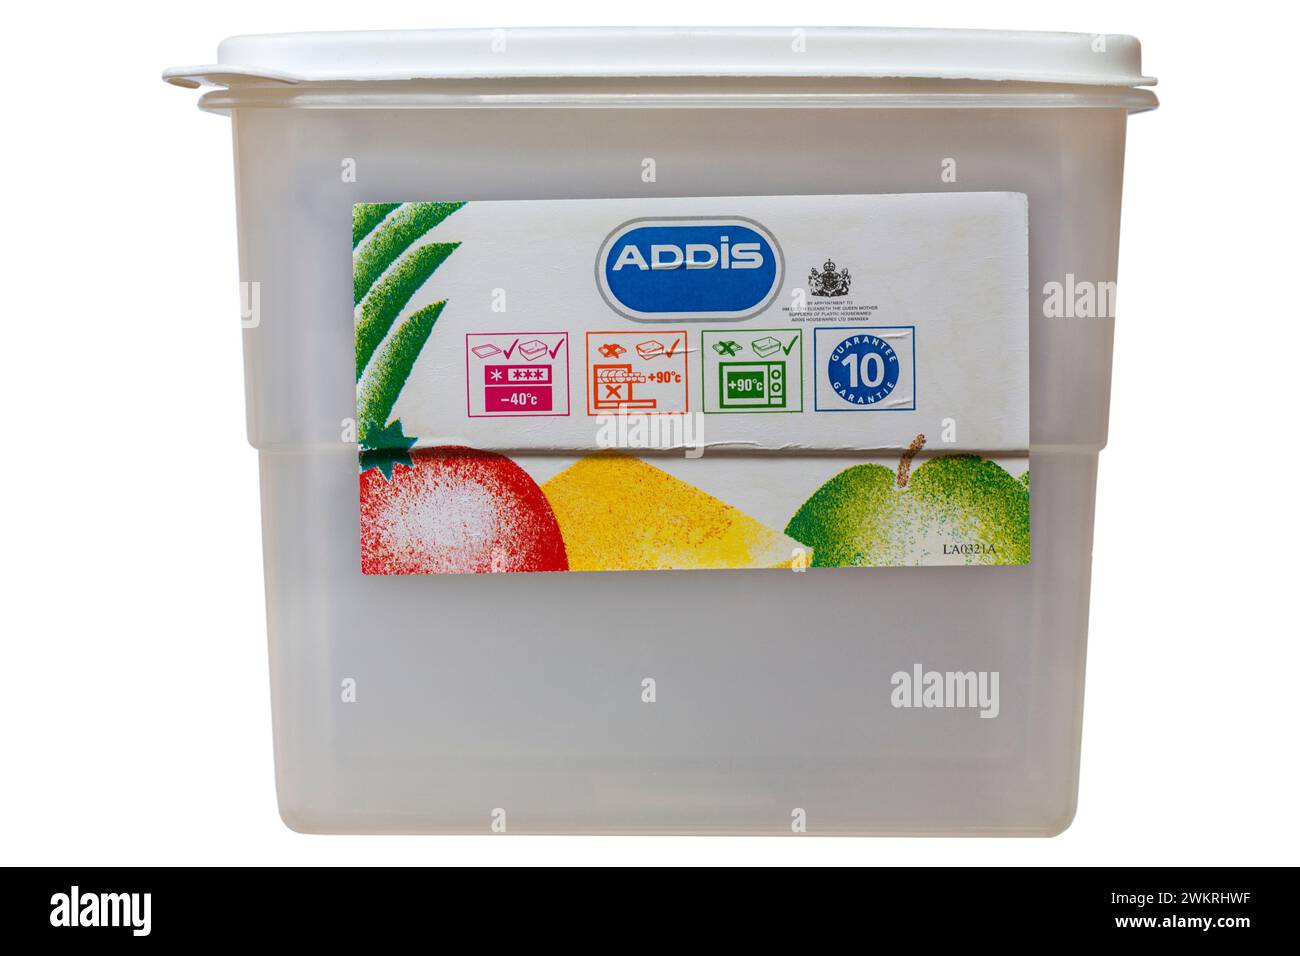 Addis plastic food container with lid isolated on white background - with care and use usage symbols information Stock Photo